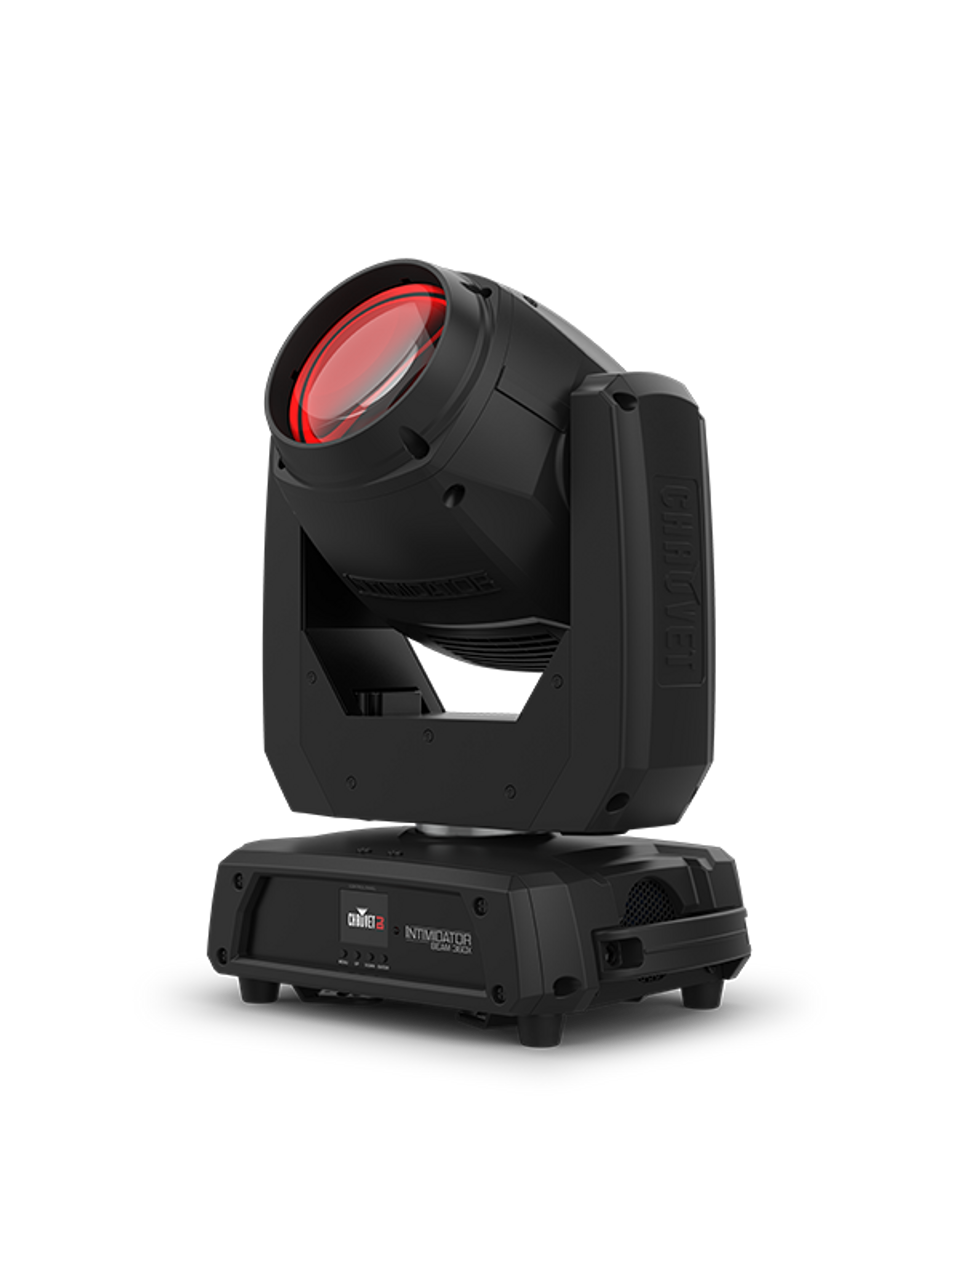 Chauvet DJ INTIMBEAM360X moving head designed for a variety of mobile events